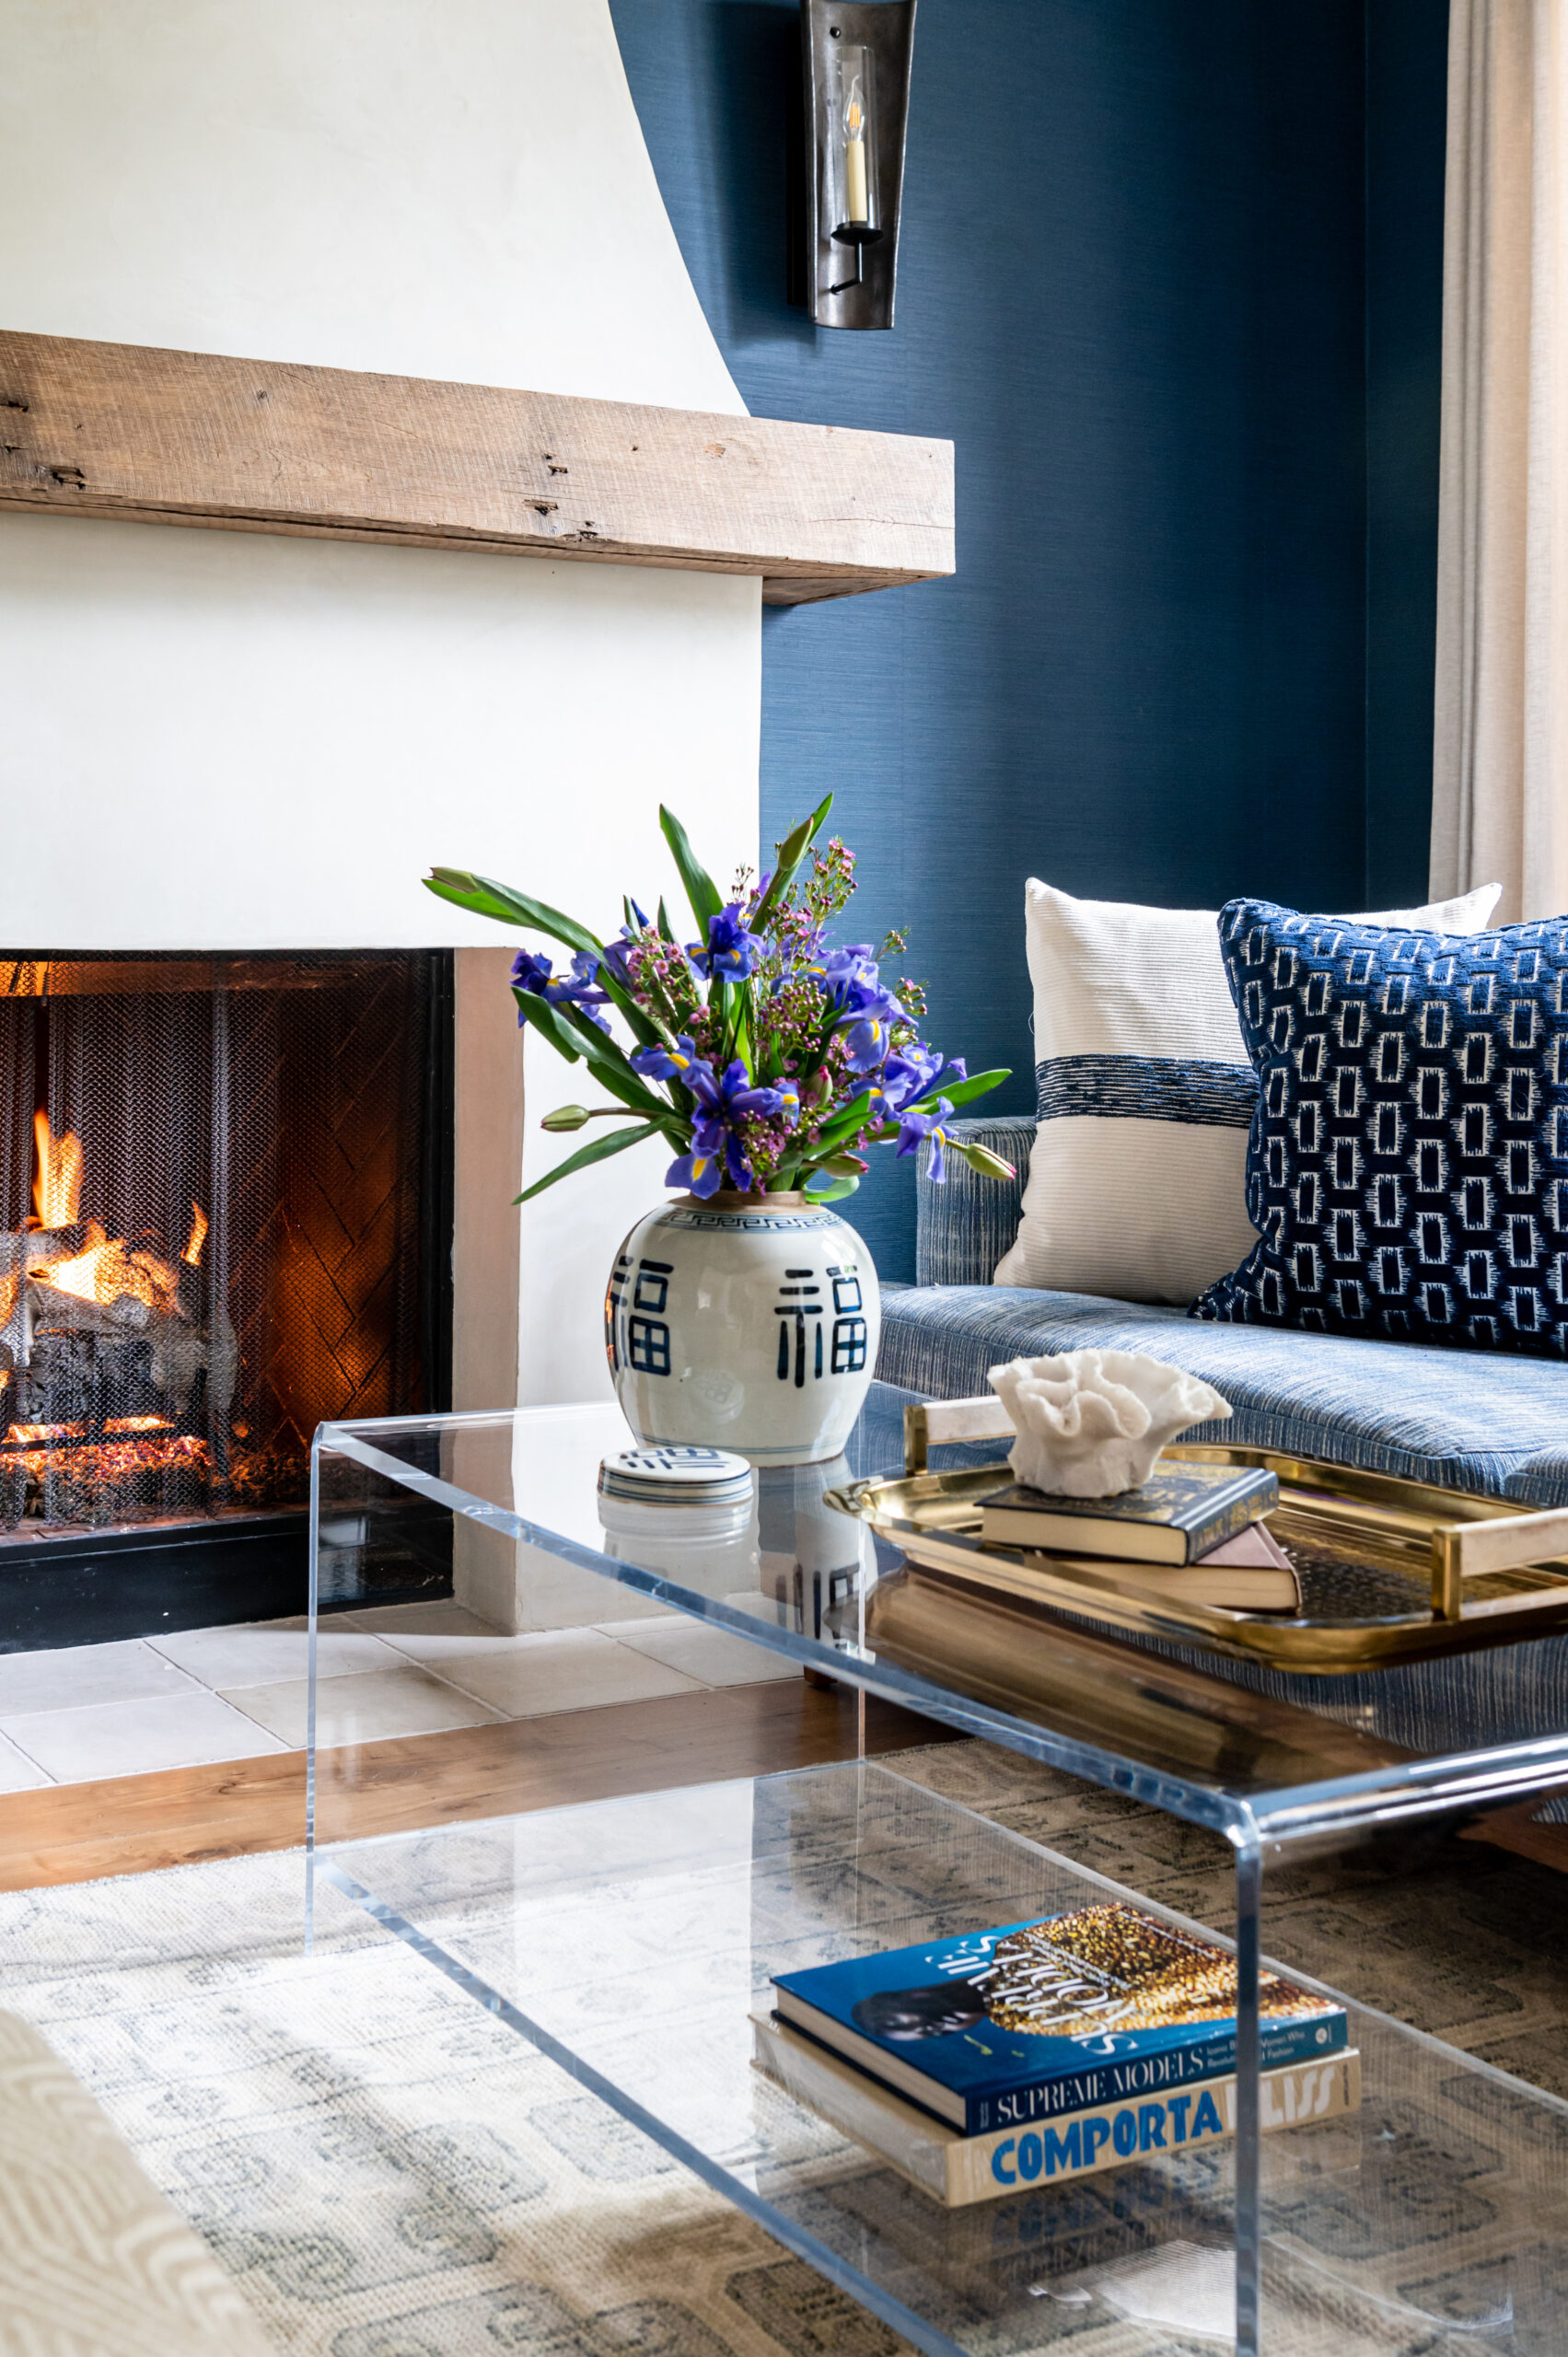 Interior design of living room with blue and colorful details, and a fireplace